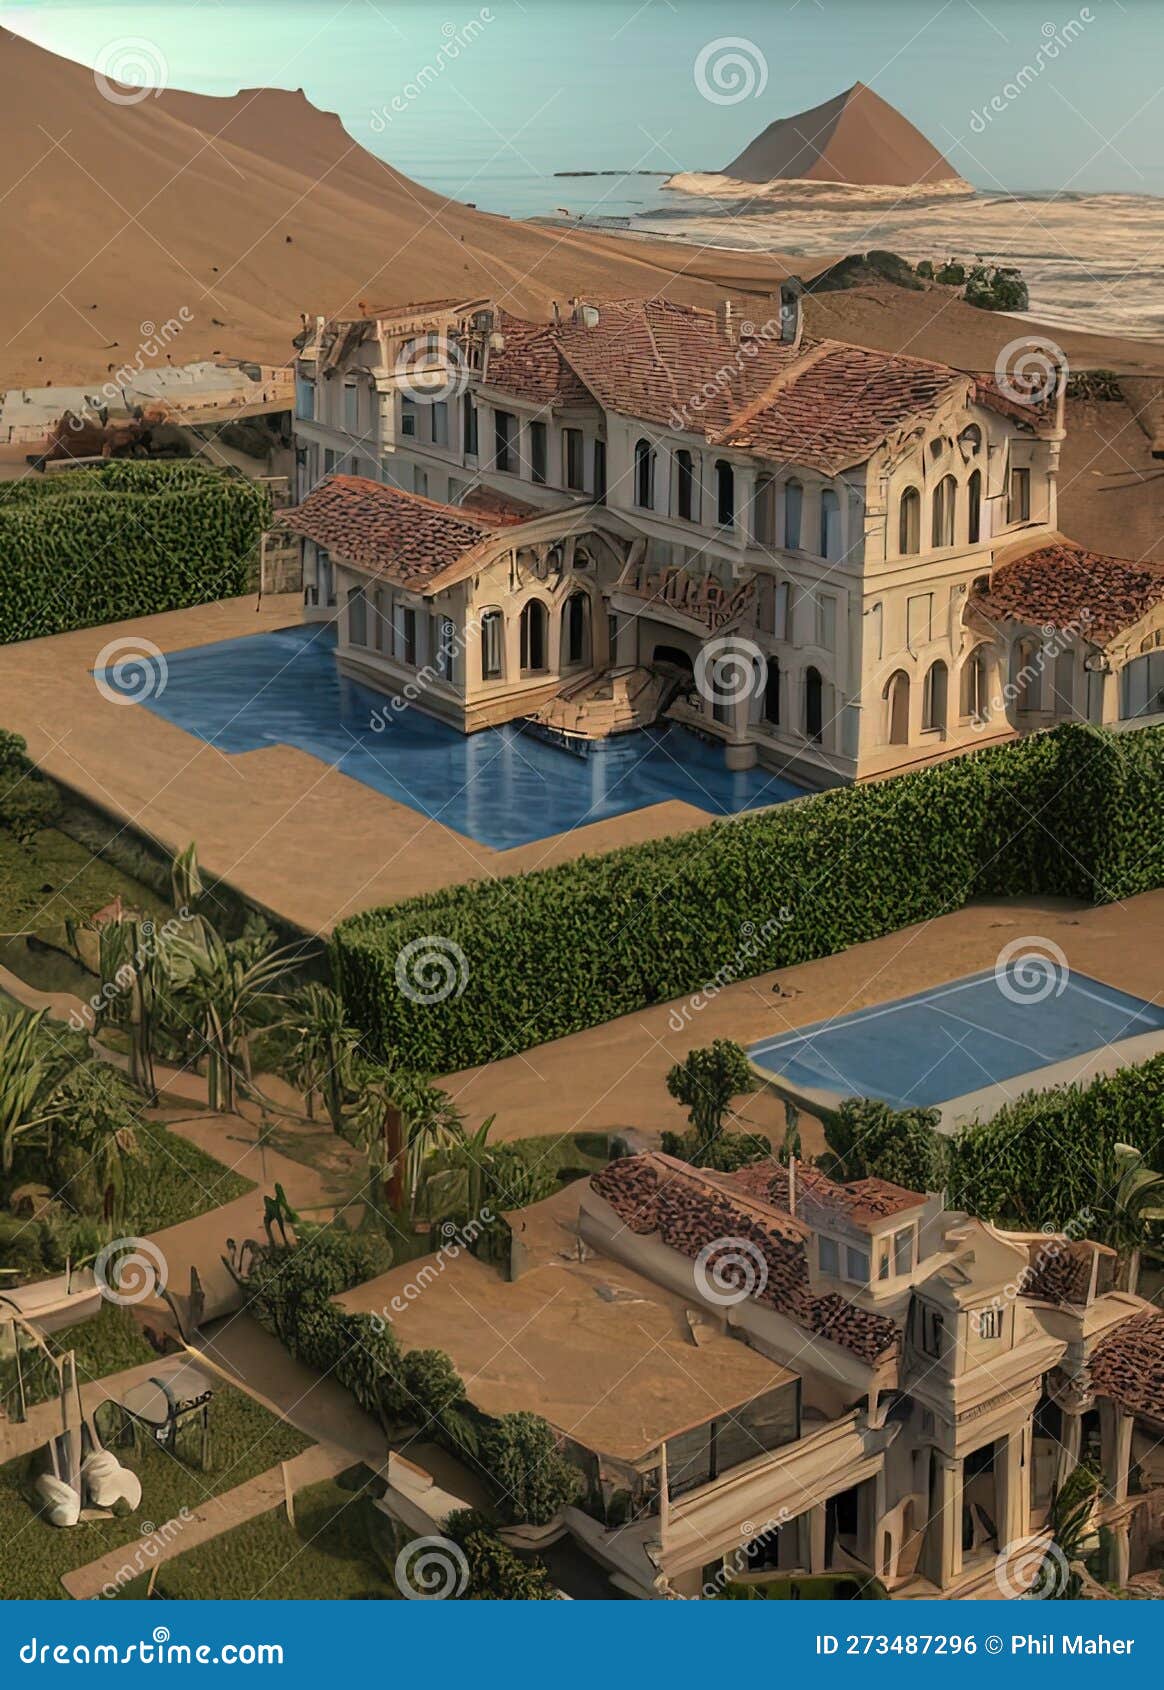 fictional mansion in iquique, tarapacÃ¡, chile.